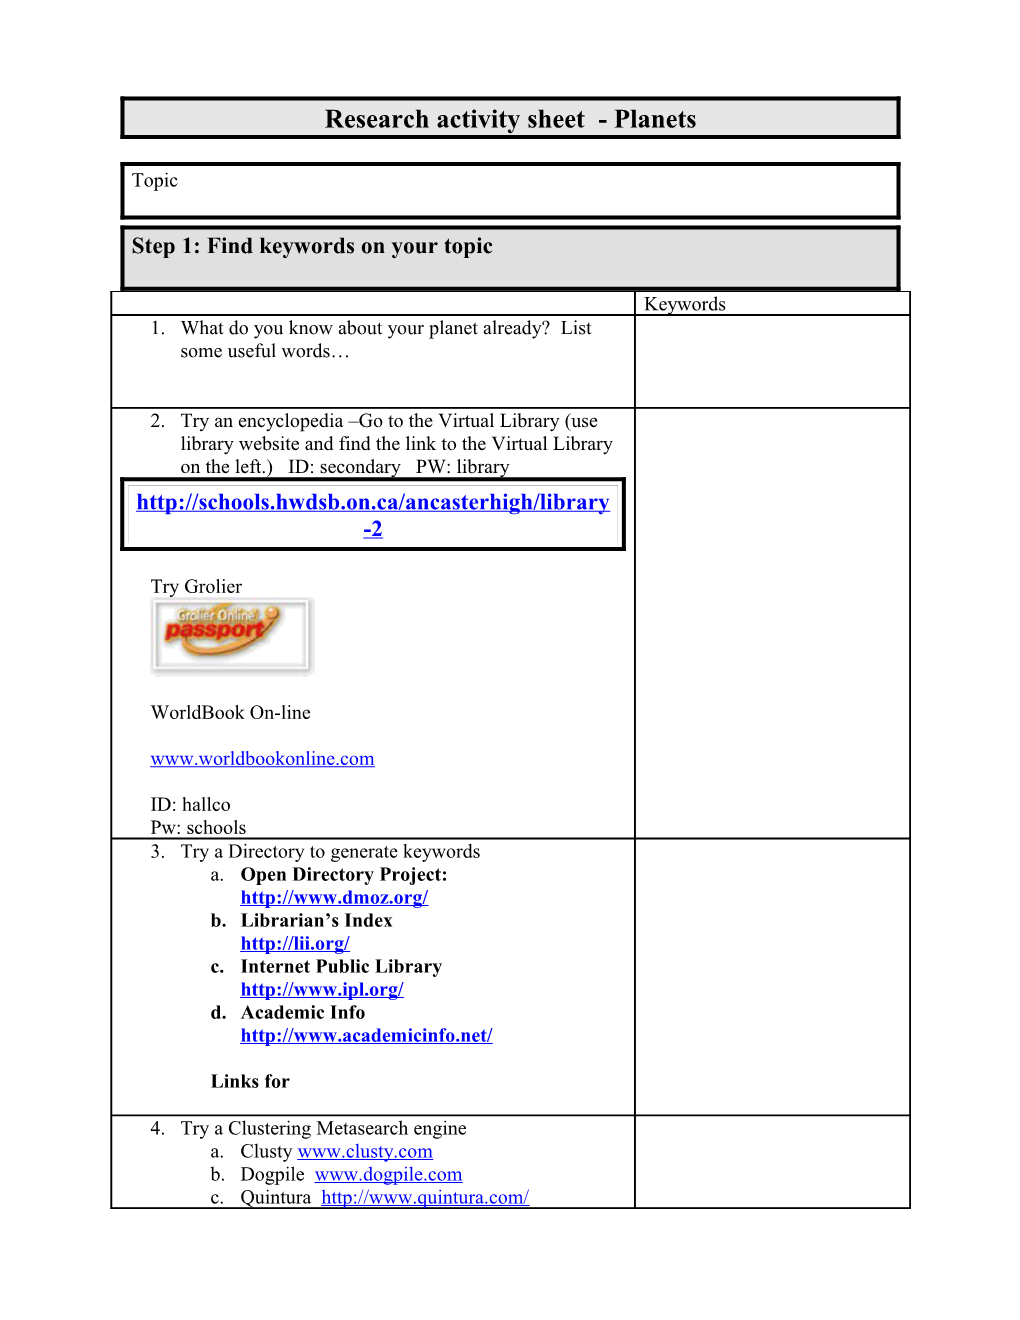 Research Activity Sheet